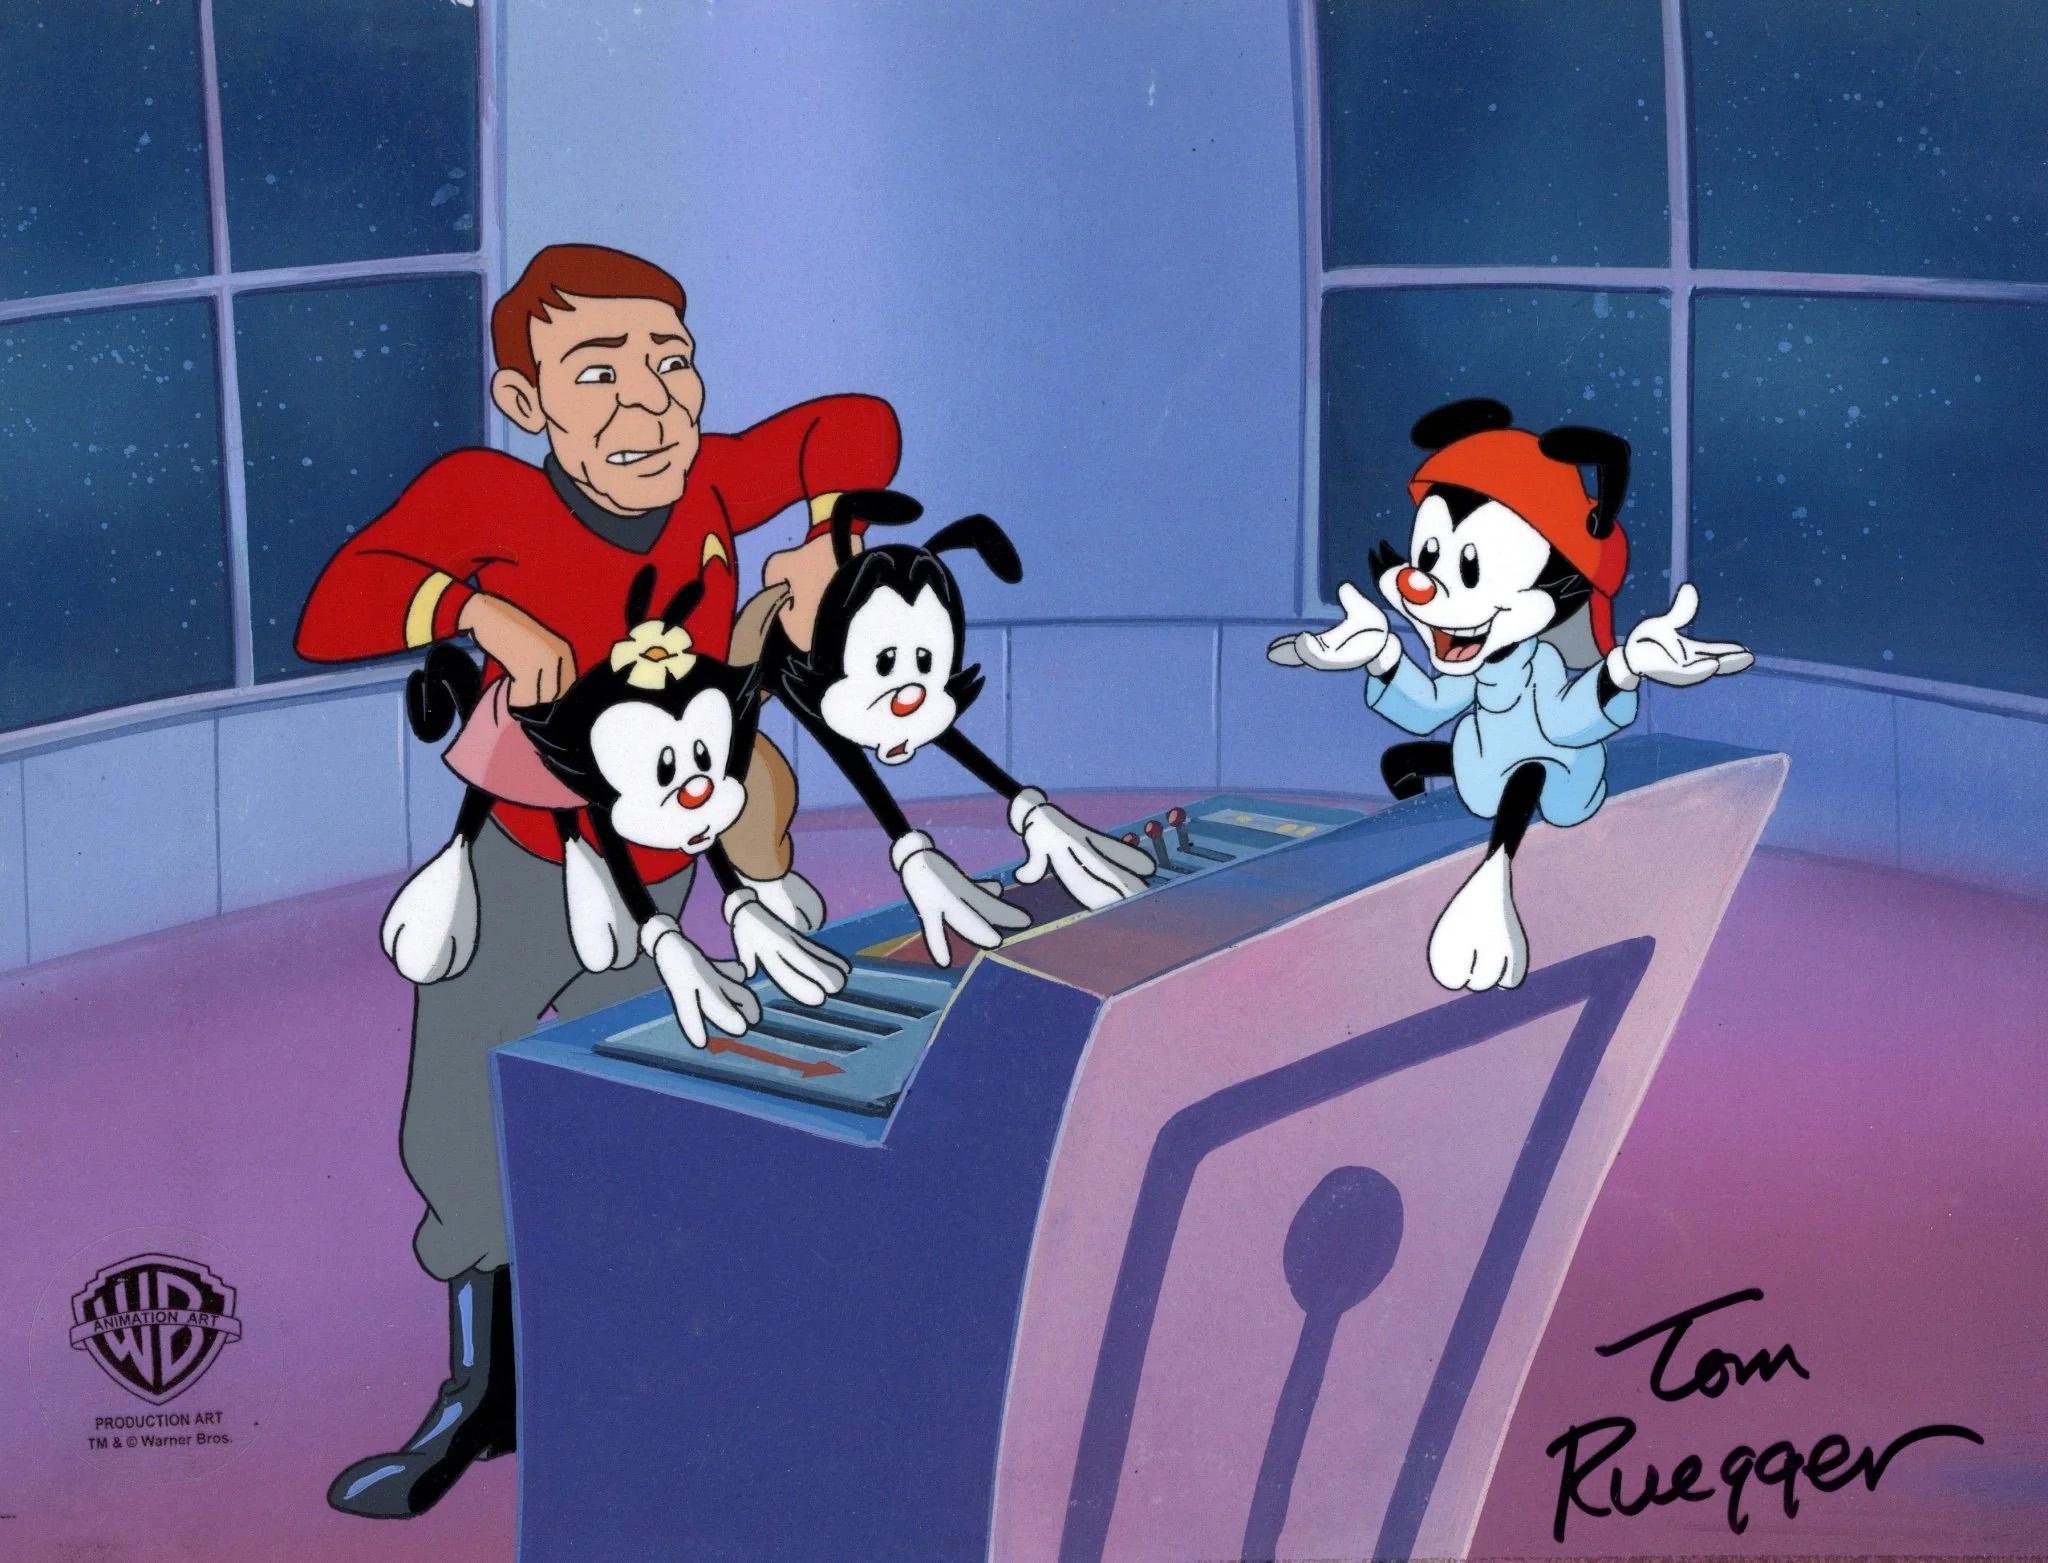 Animaniacs Original Cel & Background Signed by Tom Ruegger: The Warners, Squaty - Art by Warner Bros. Studio Artists